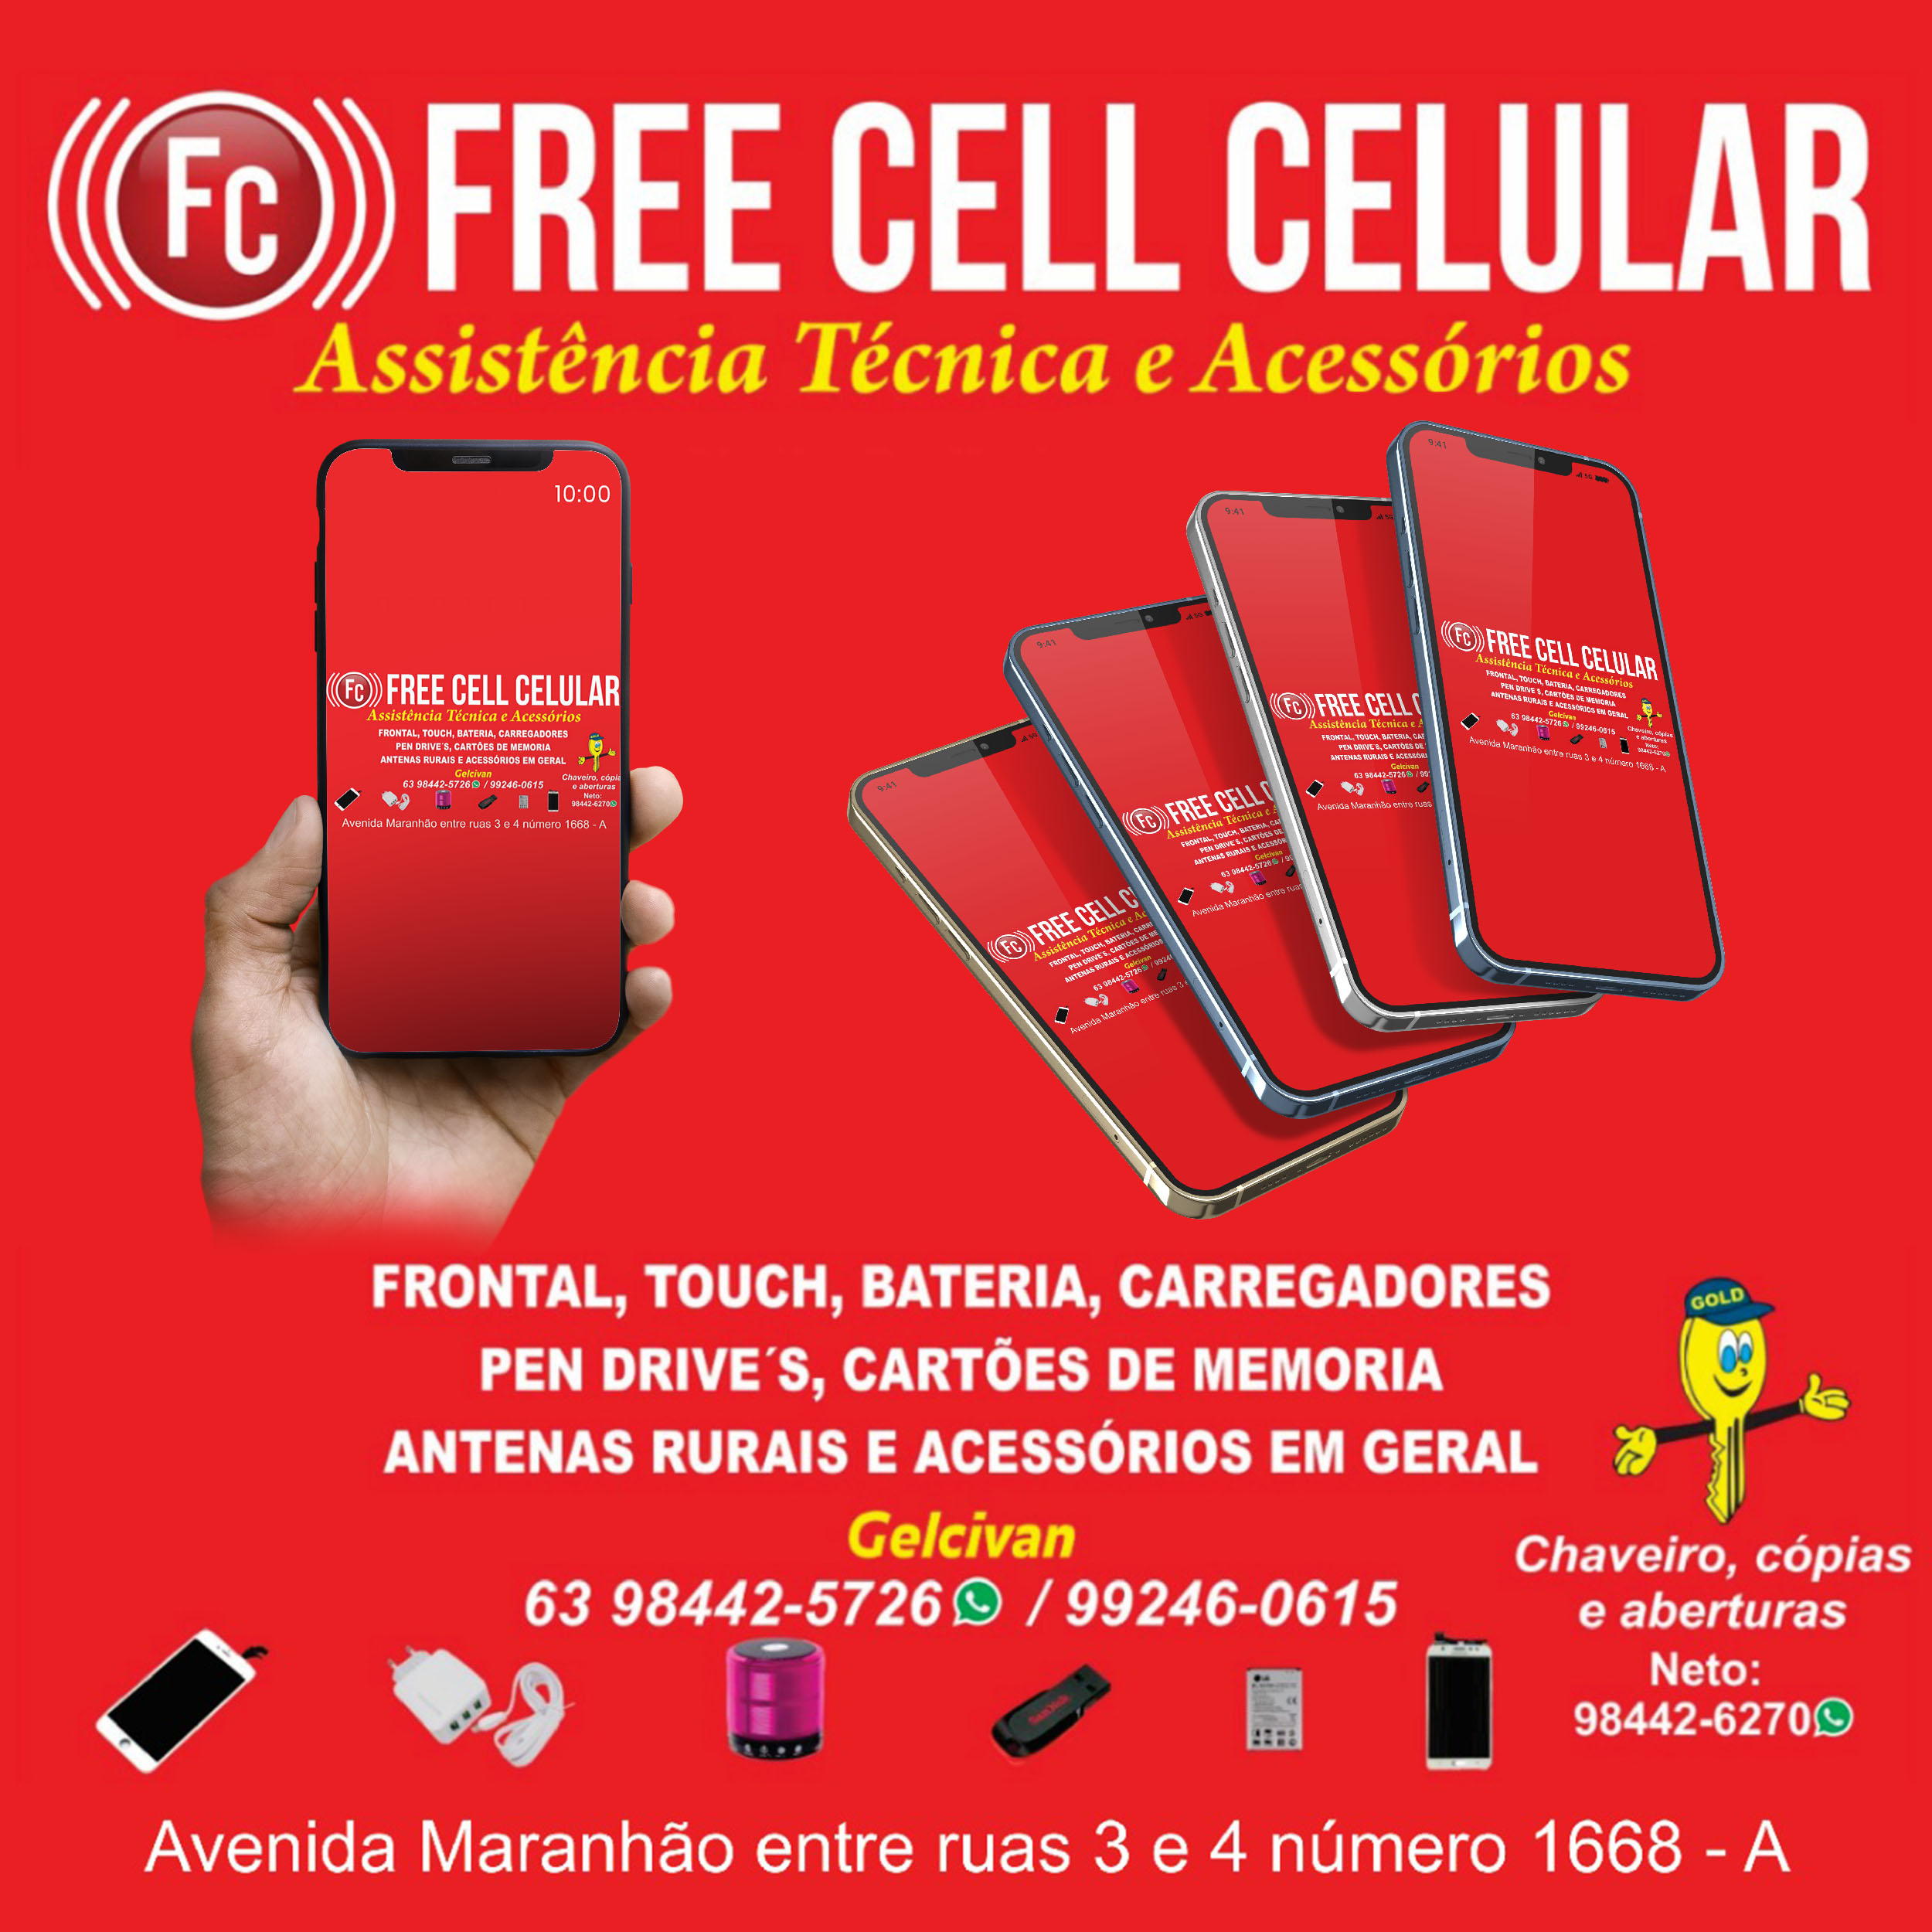 FREE CELL